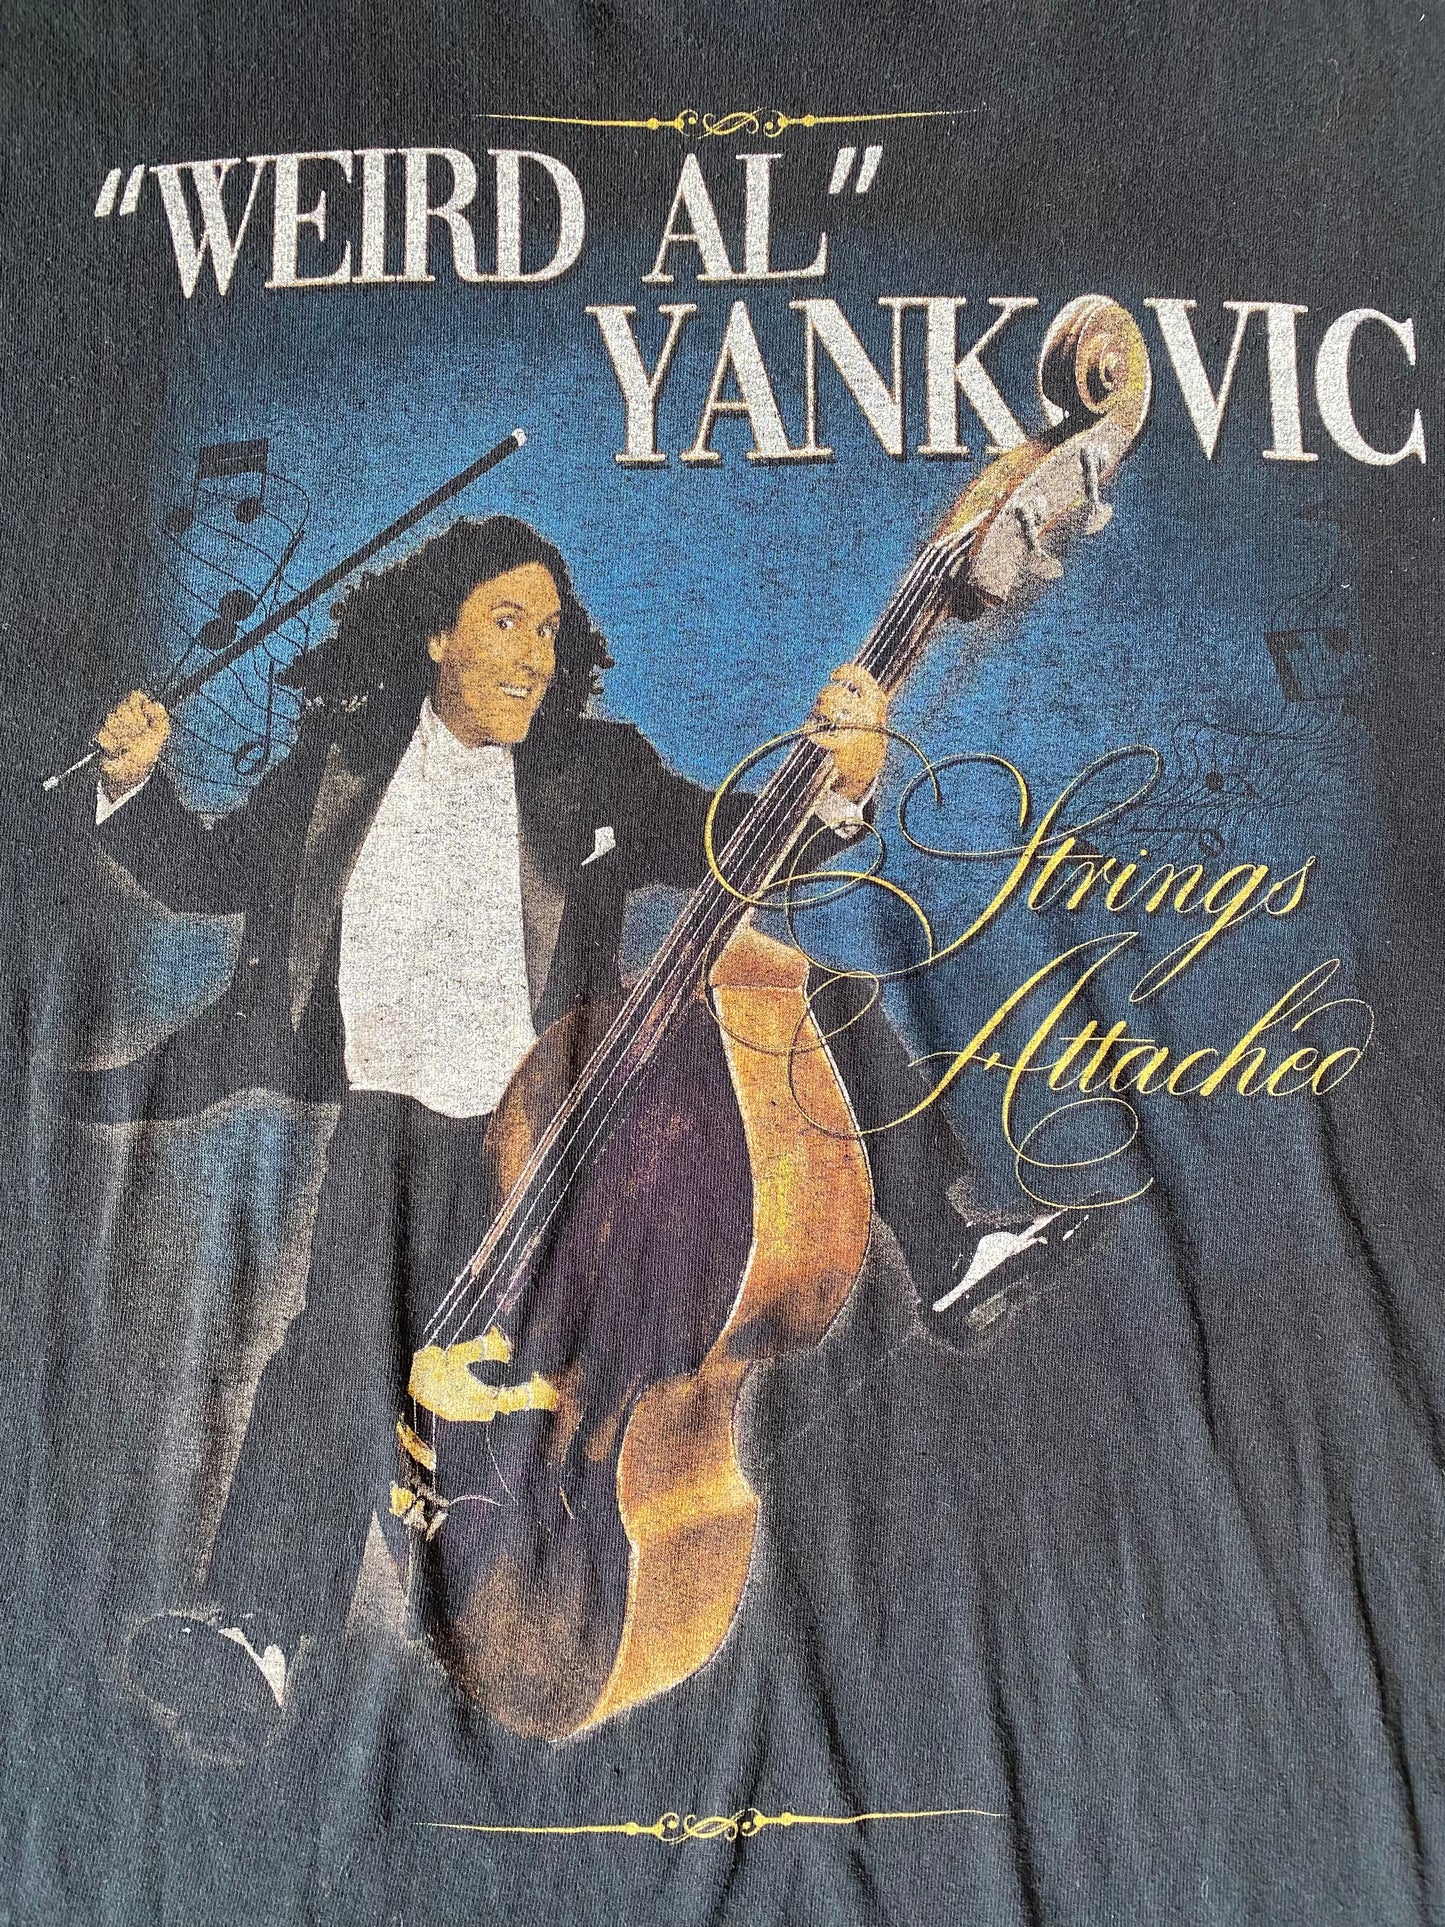 2019 Weird Al Yankovic Strings Attached Tour Tee